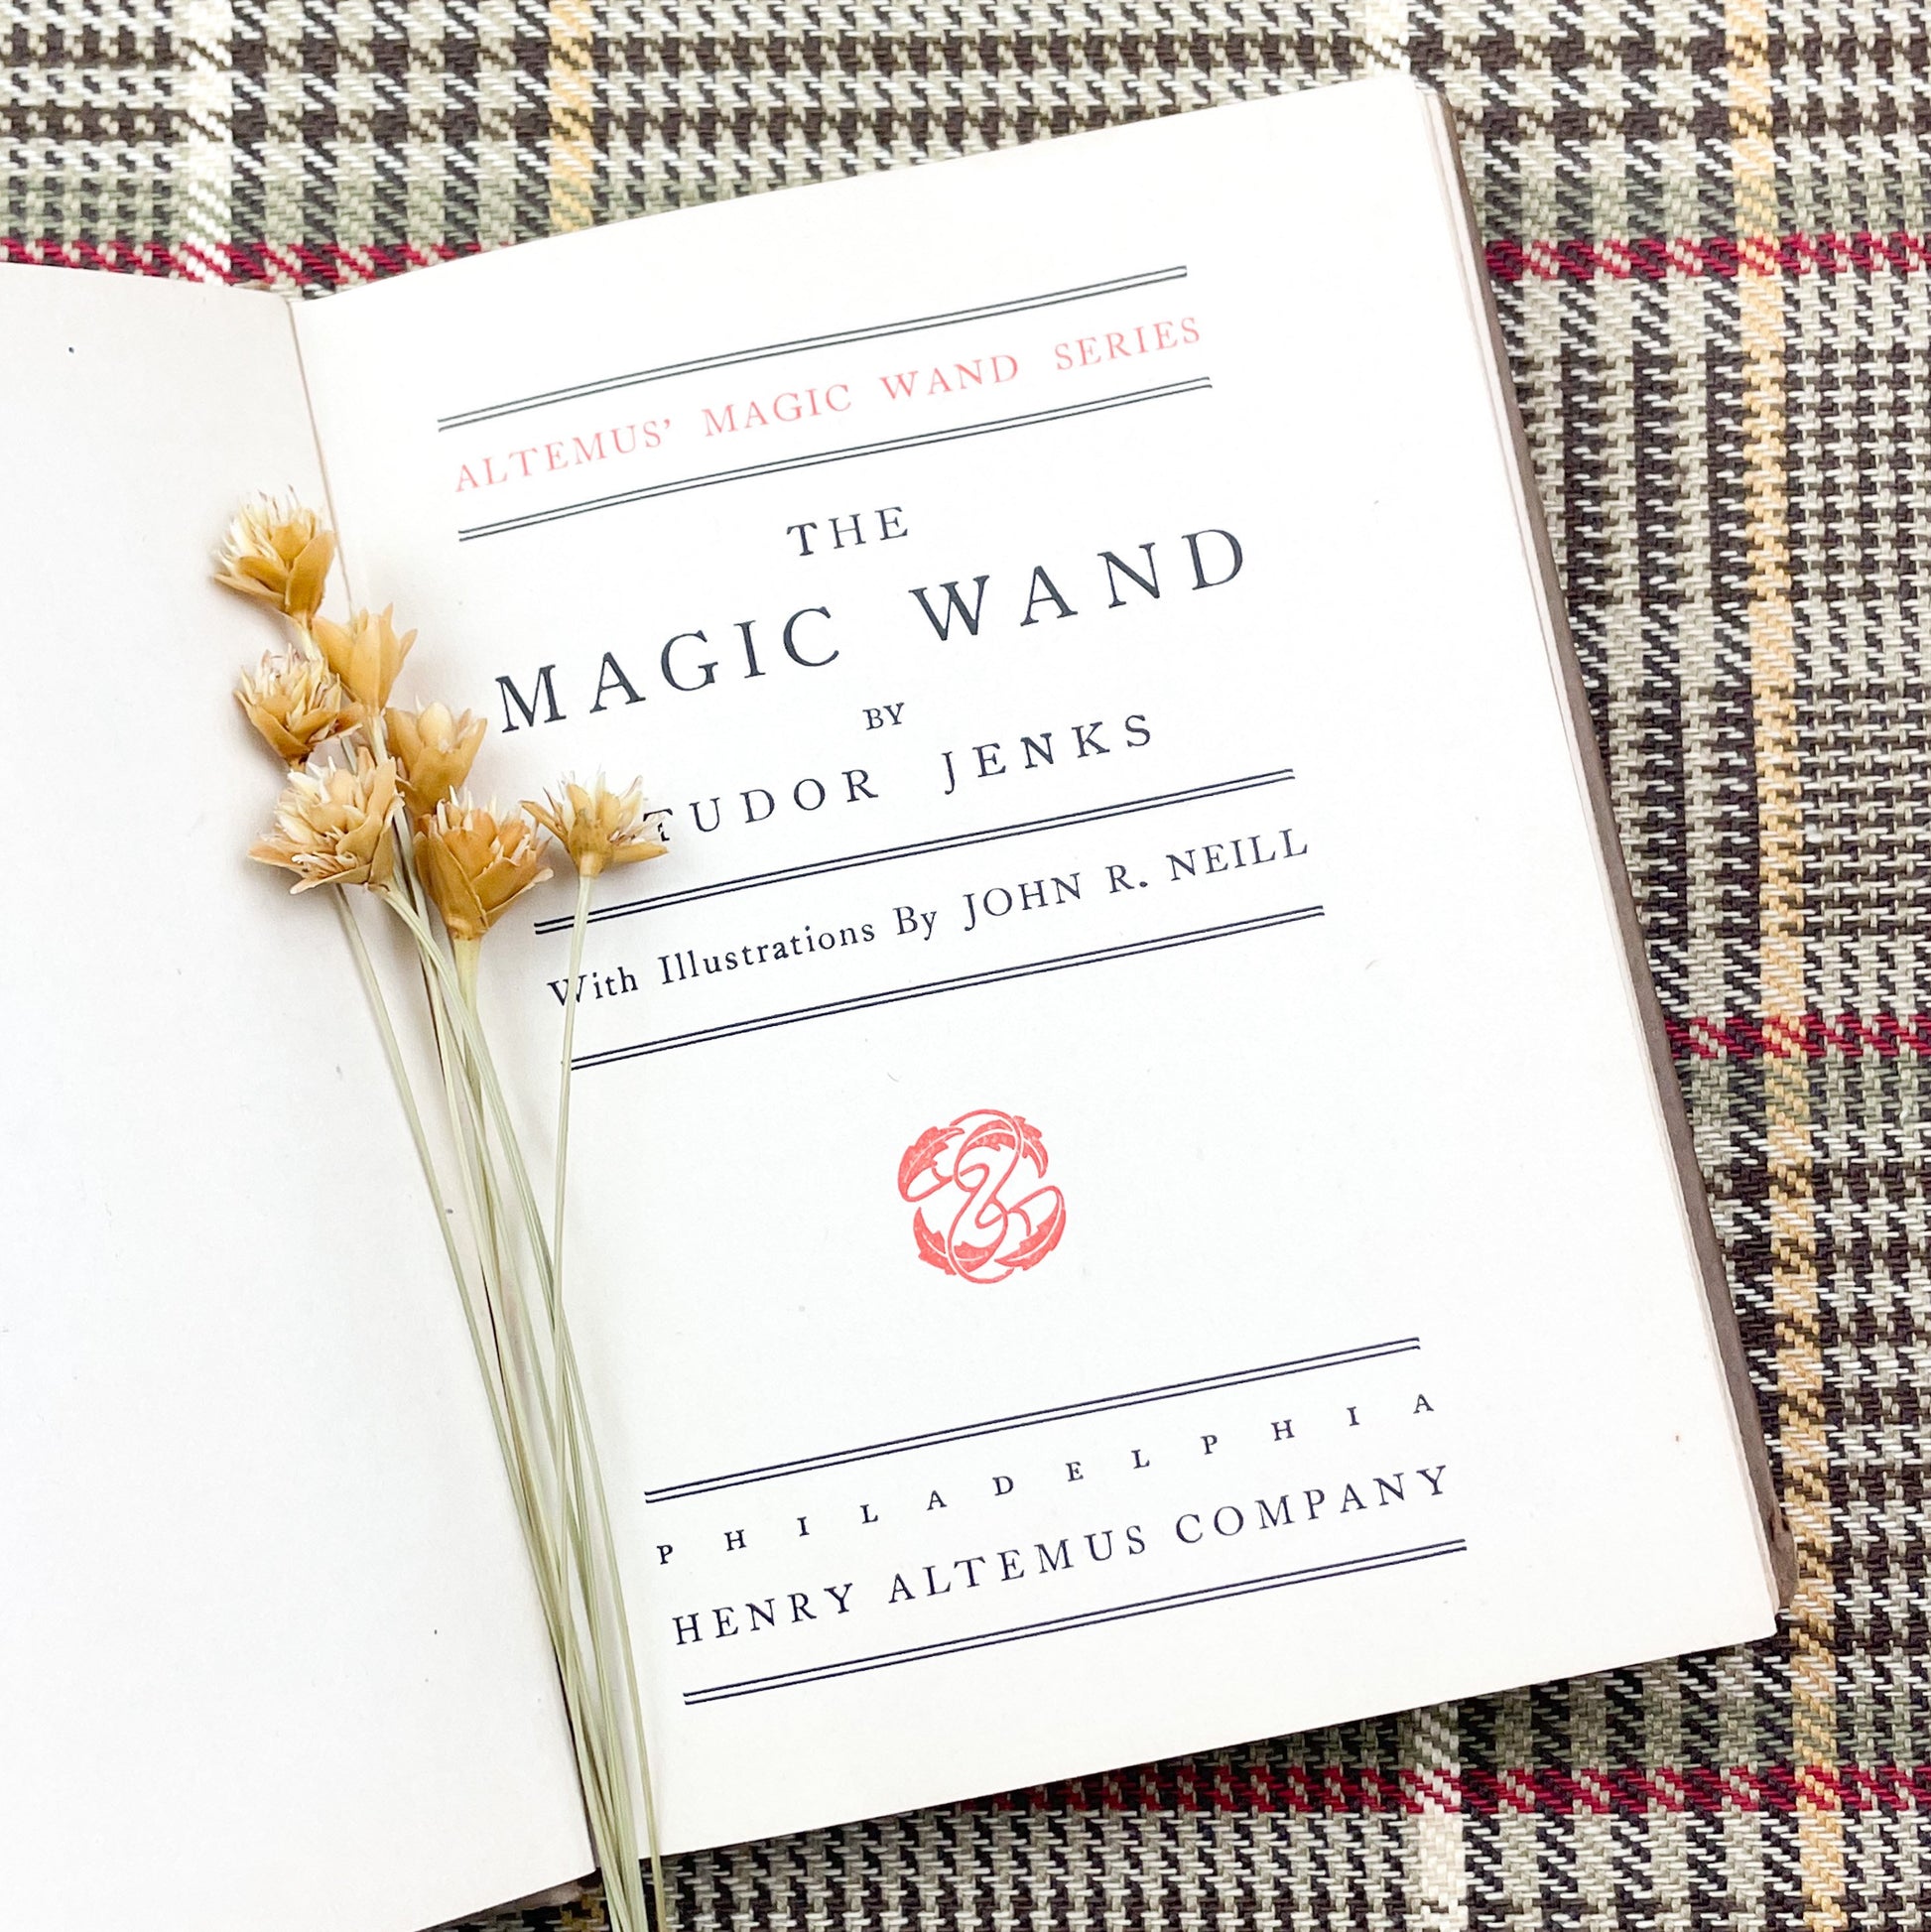 Antique Book, The Magic Wand by Tudor Jenks